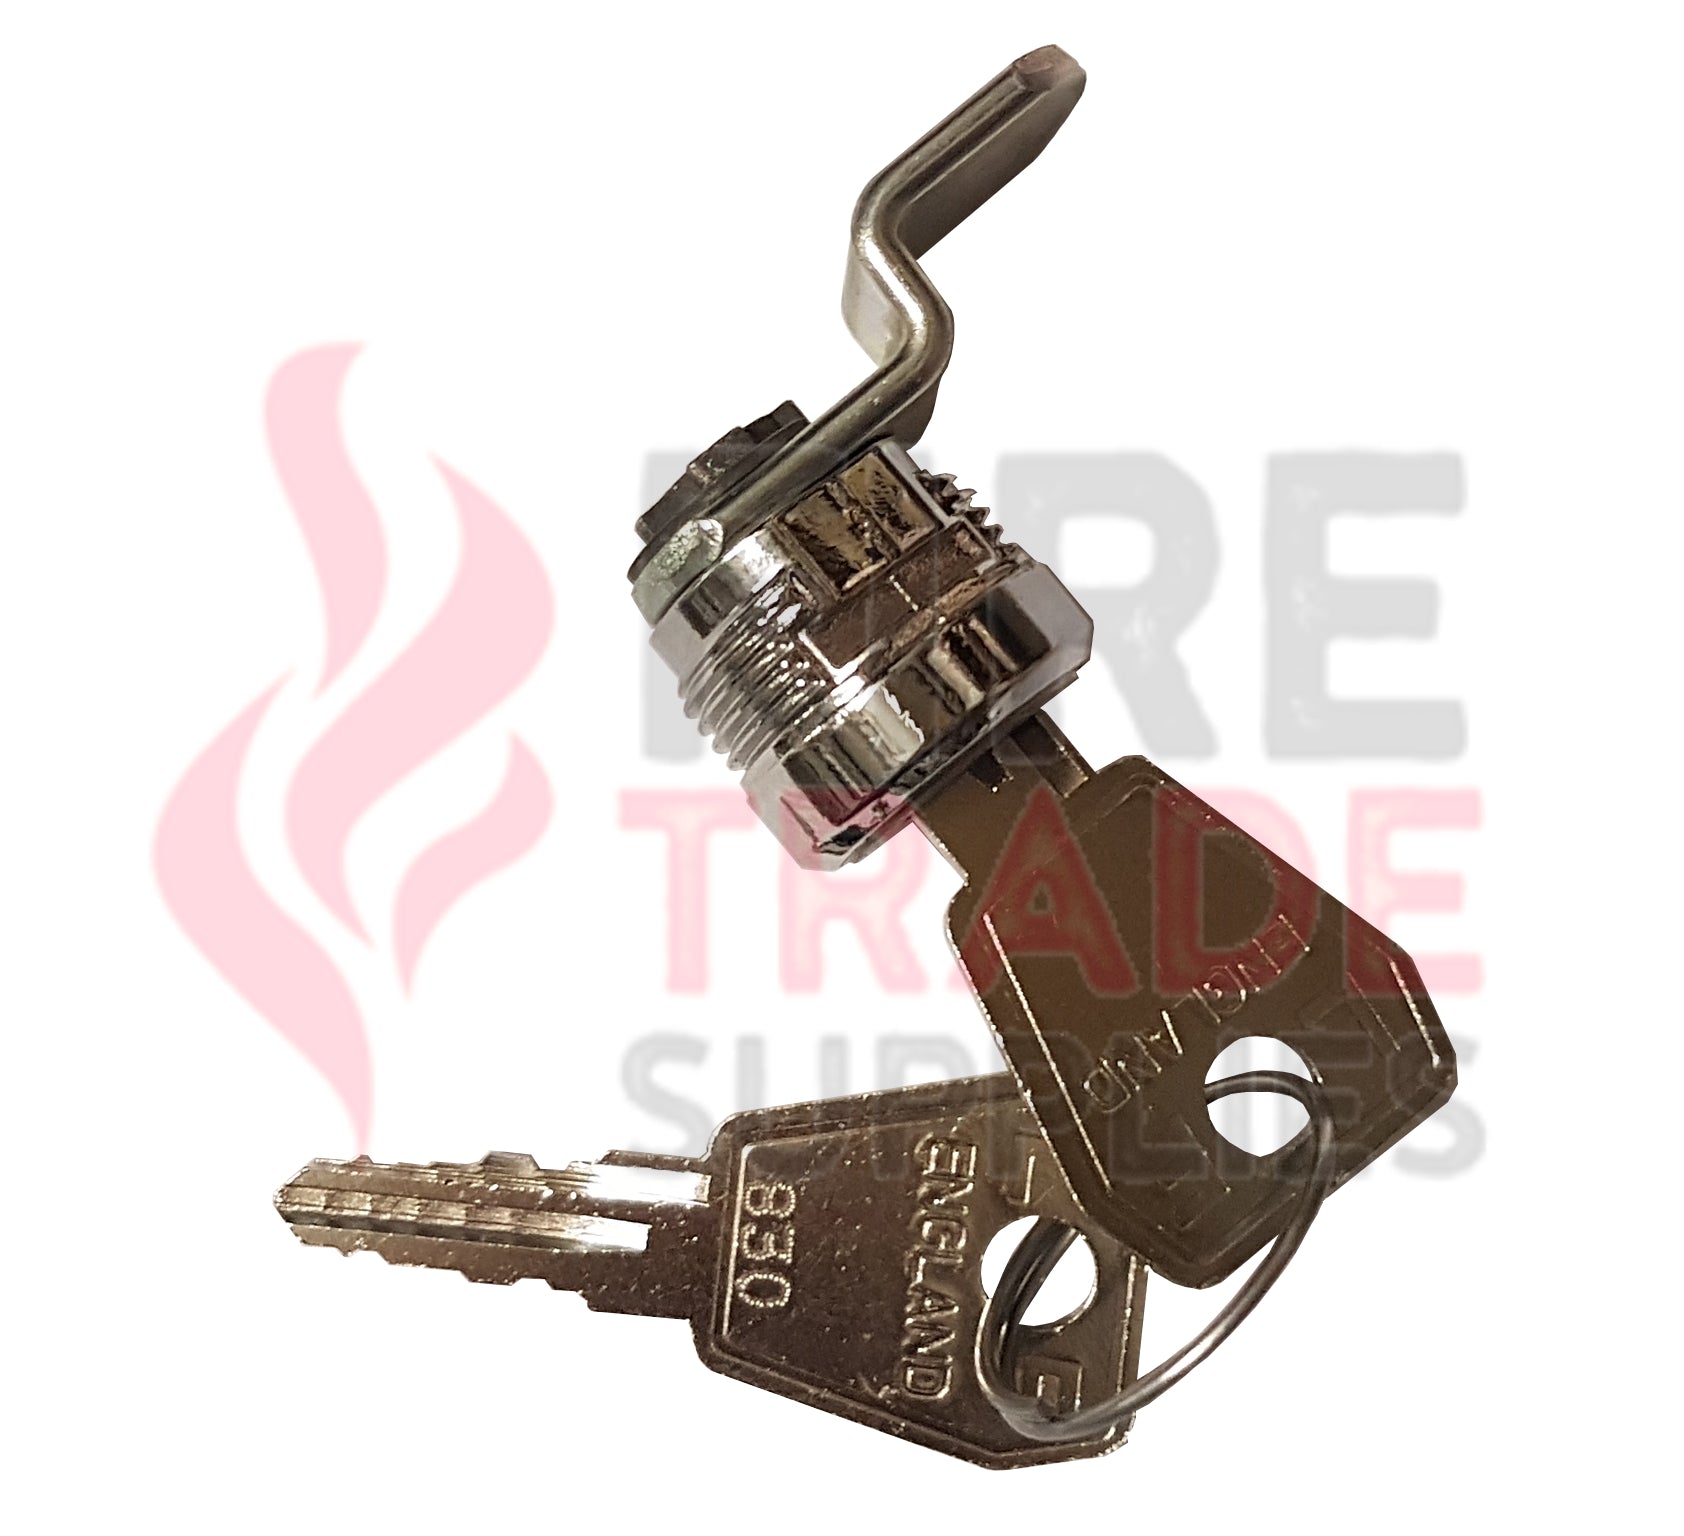 29-456-74 Protec AN4000 Panel Lock Assembly - Fire Trade Supplies